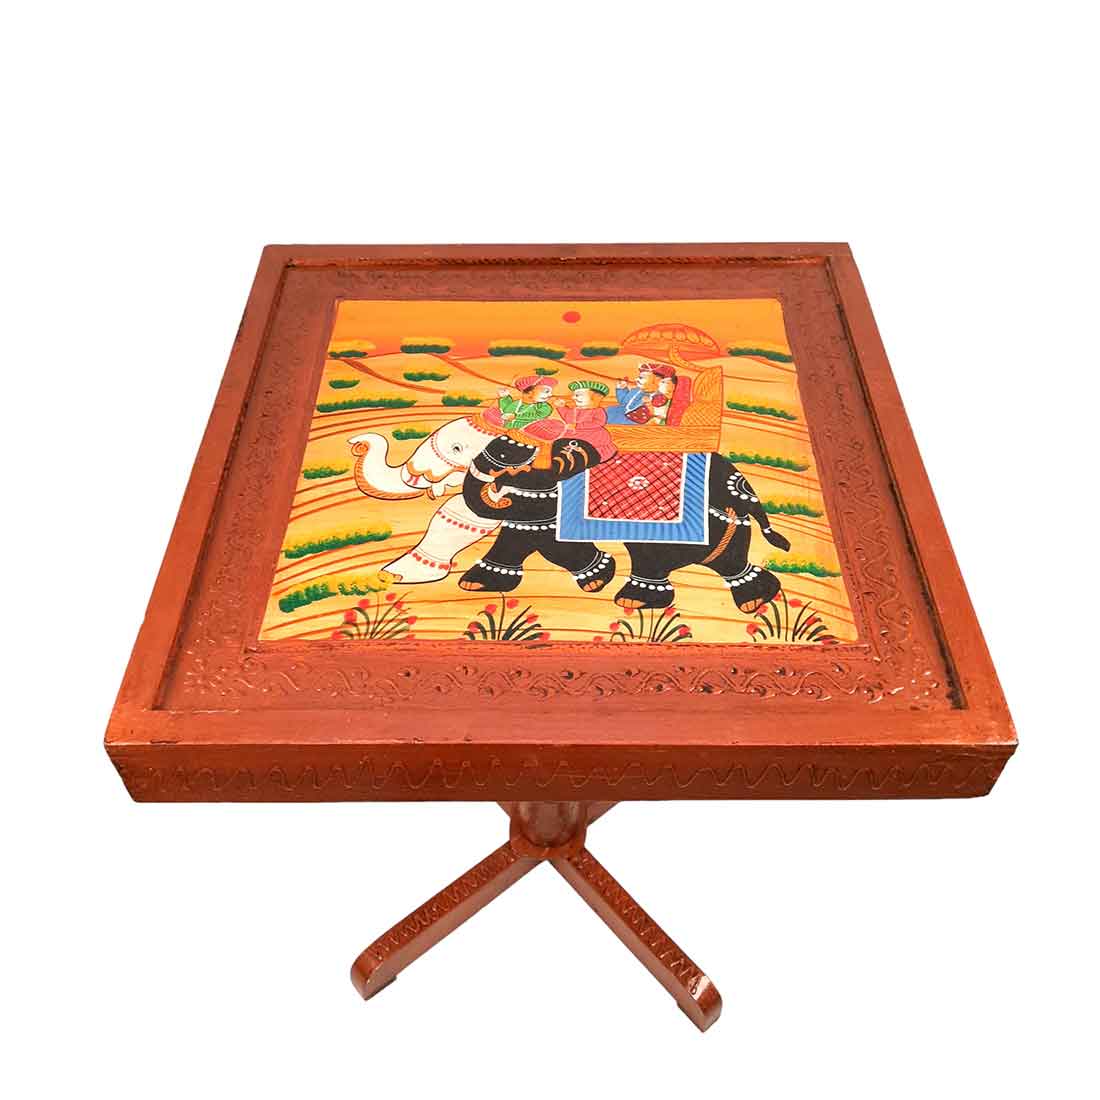 Products Side Table | Wooden End Table Set - for Living Room, Sofa Corners, Home & Office Decor & Gifts - 20 Inch - Apkamart